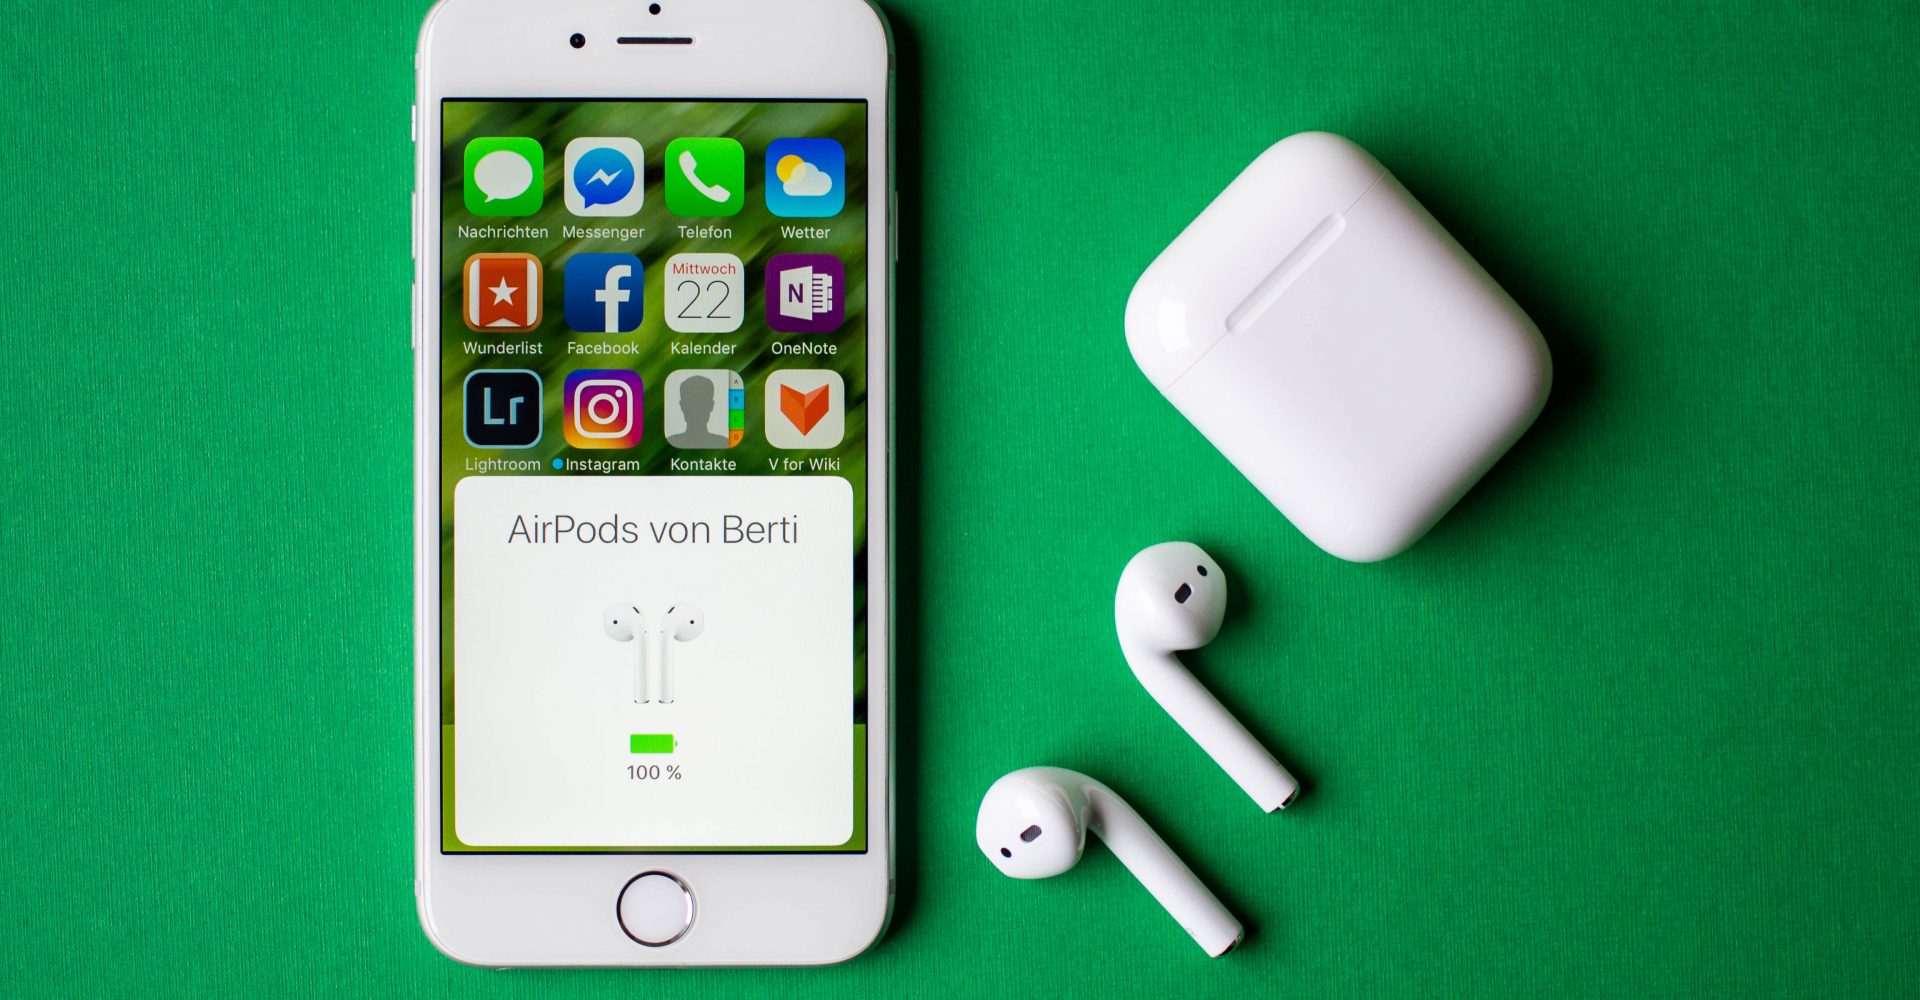 Airpods green